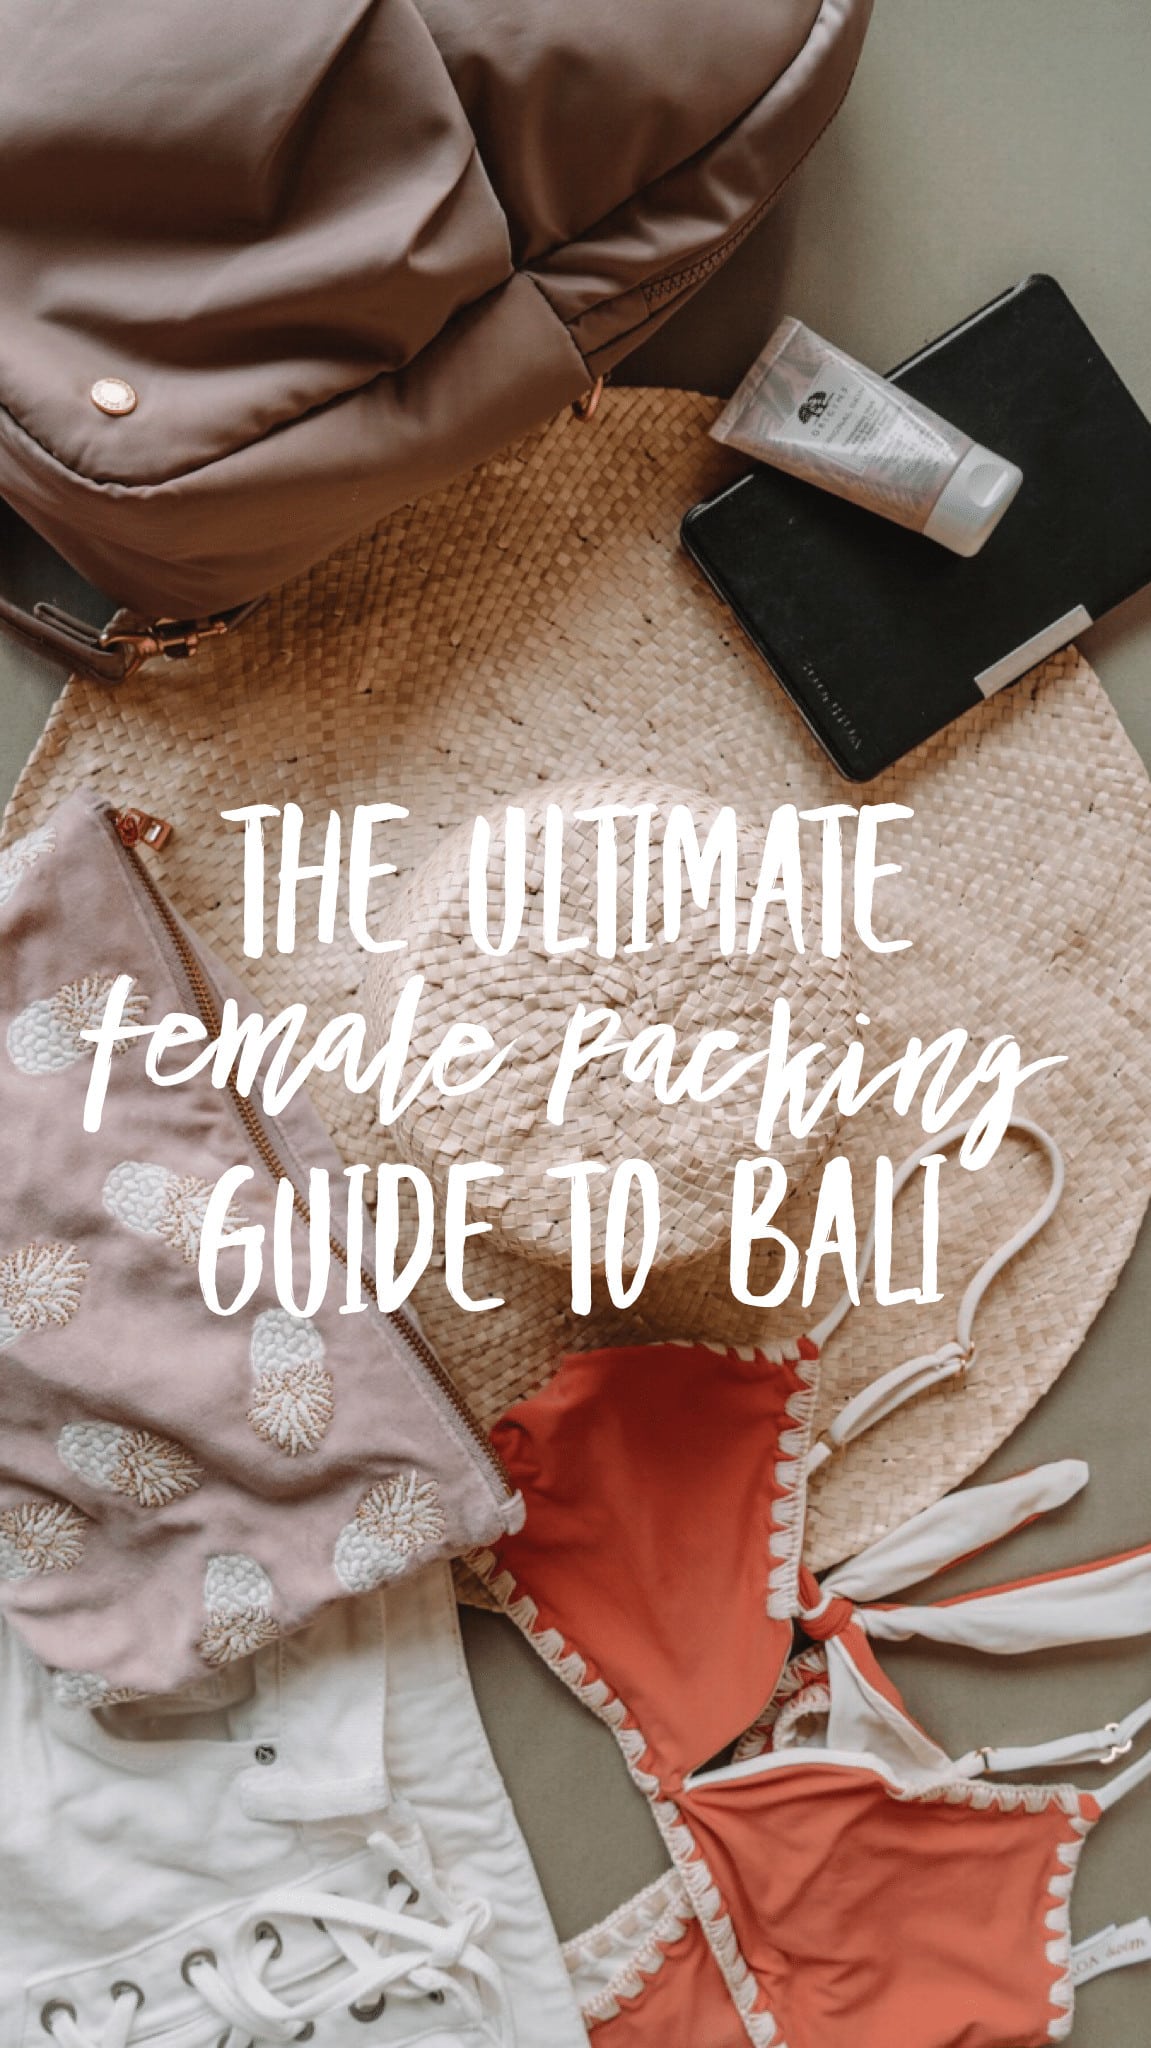 The Ultimate Female Guide to Packing For Bali + Complete Packing List!